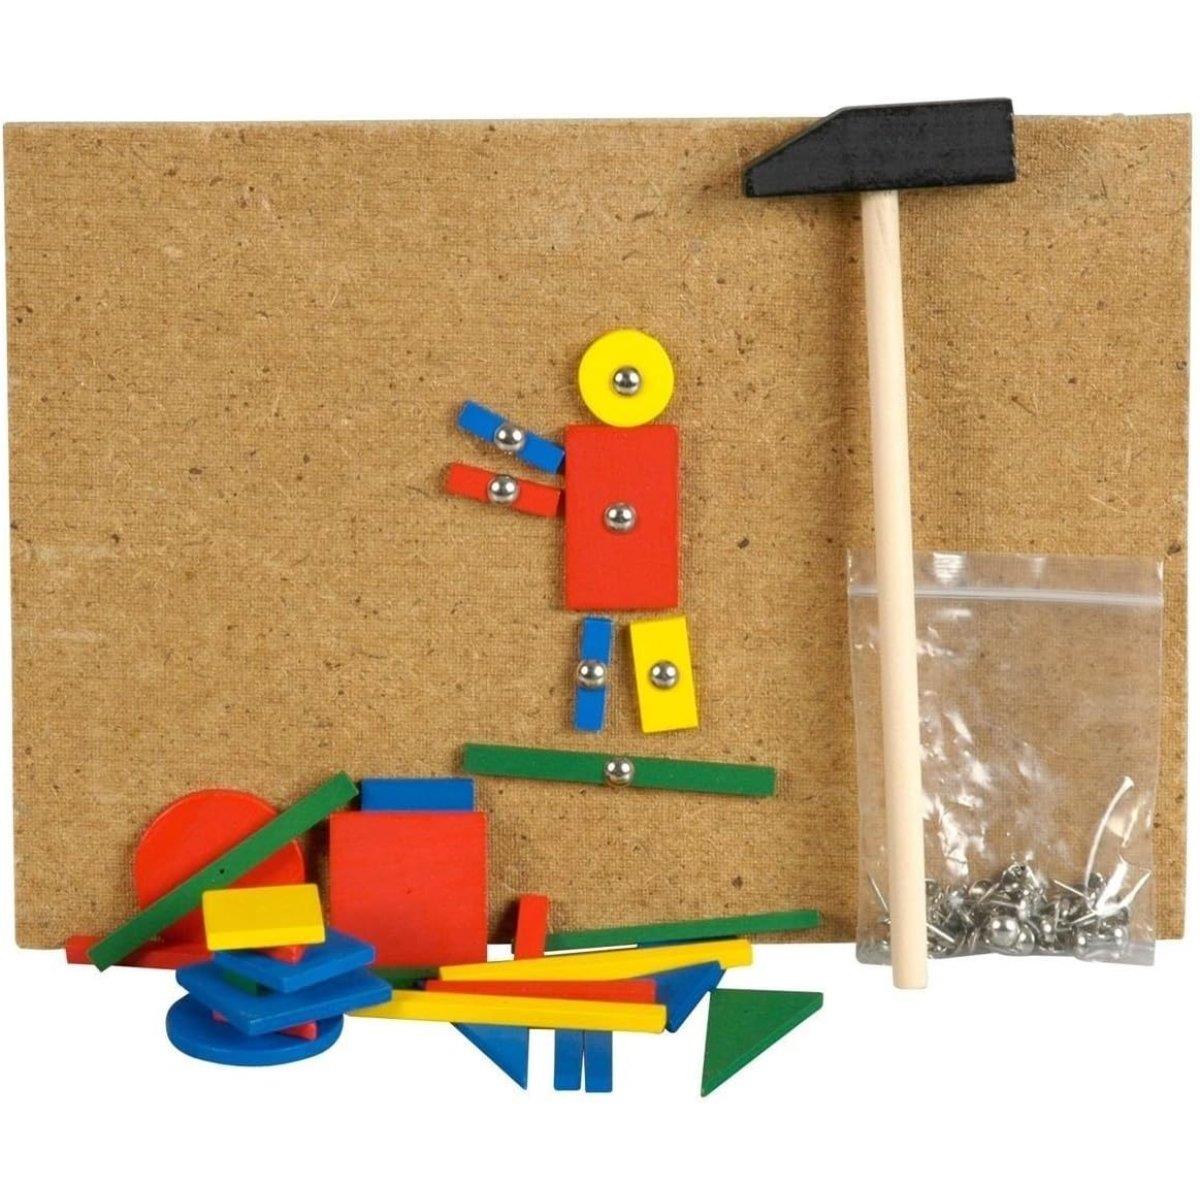 Hammer and Nails Tap Tap Art Playset by The Magic Toy Shop - UKBuyZone